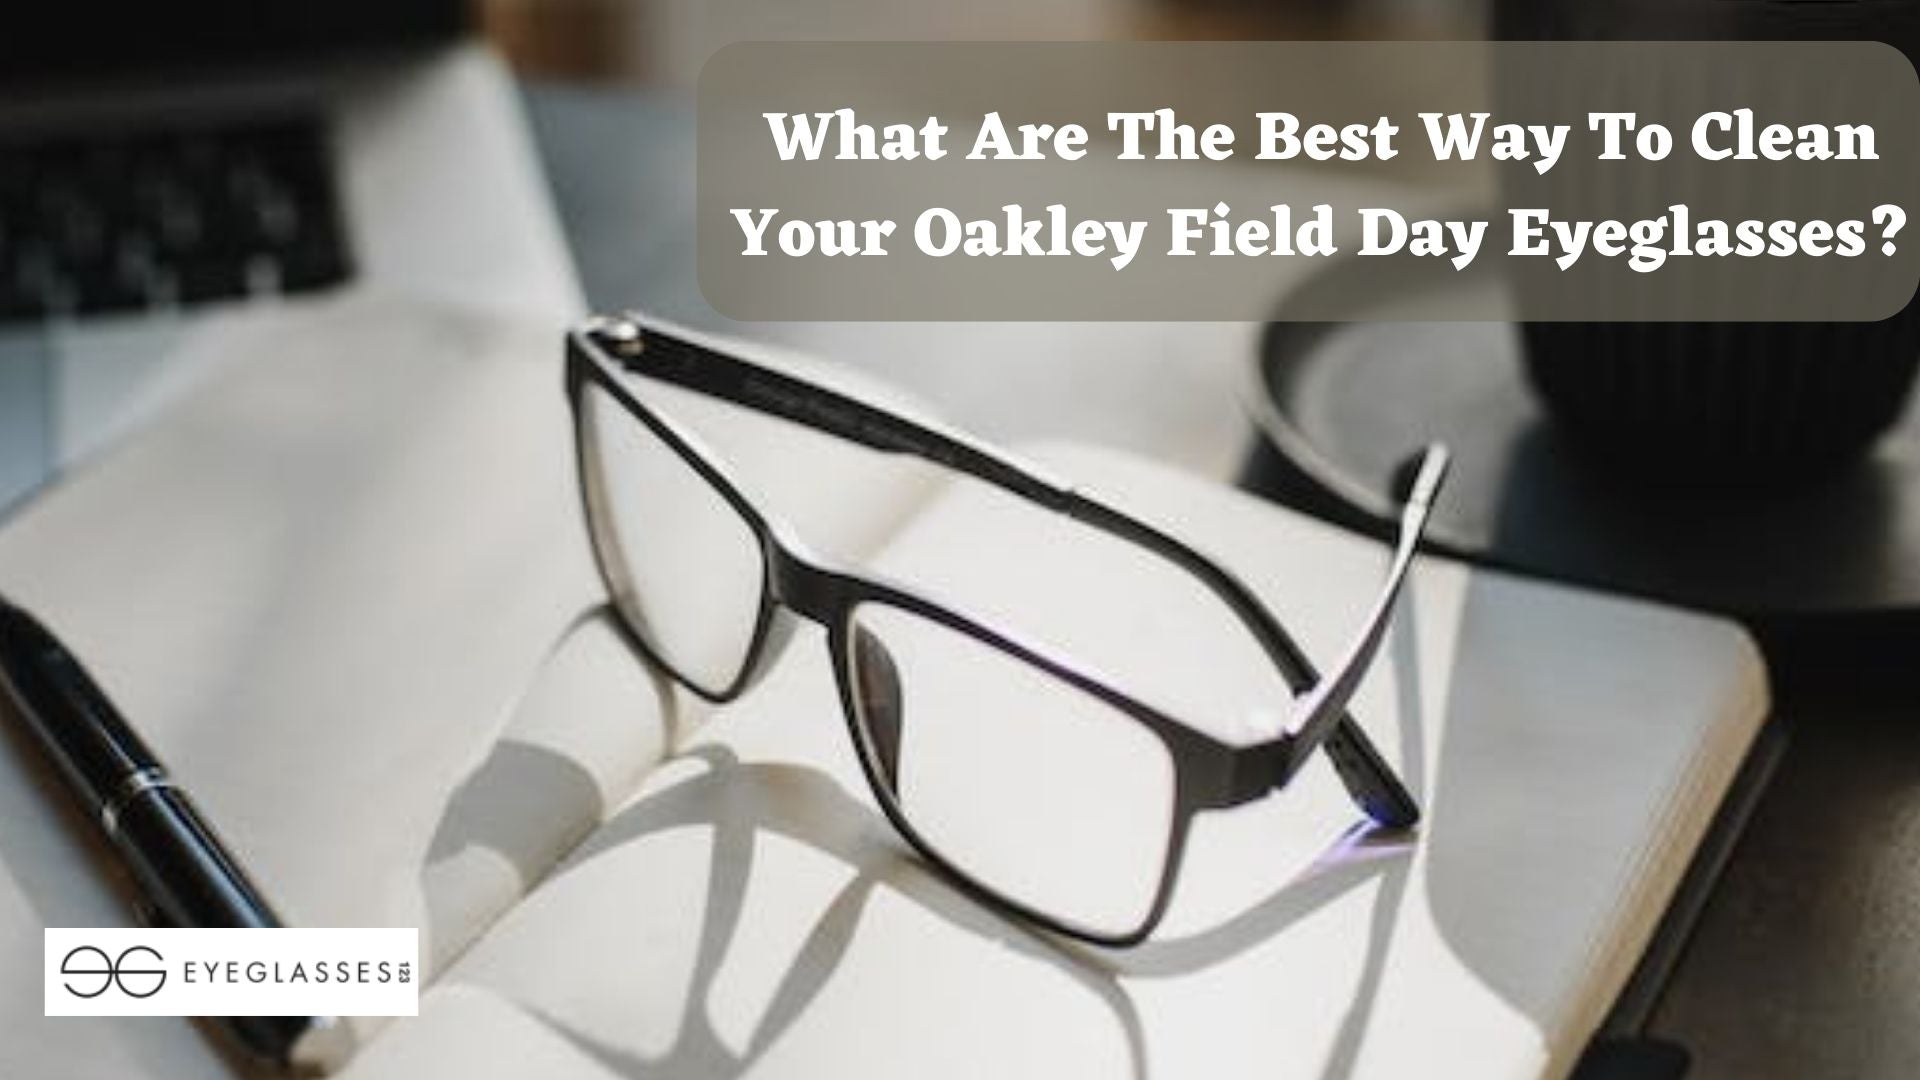 What Are The Best Way To Clean Your Oakley Field Day Eyeglasses?